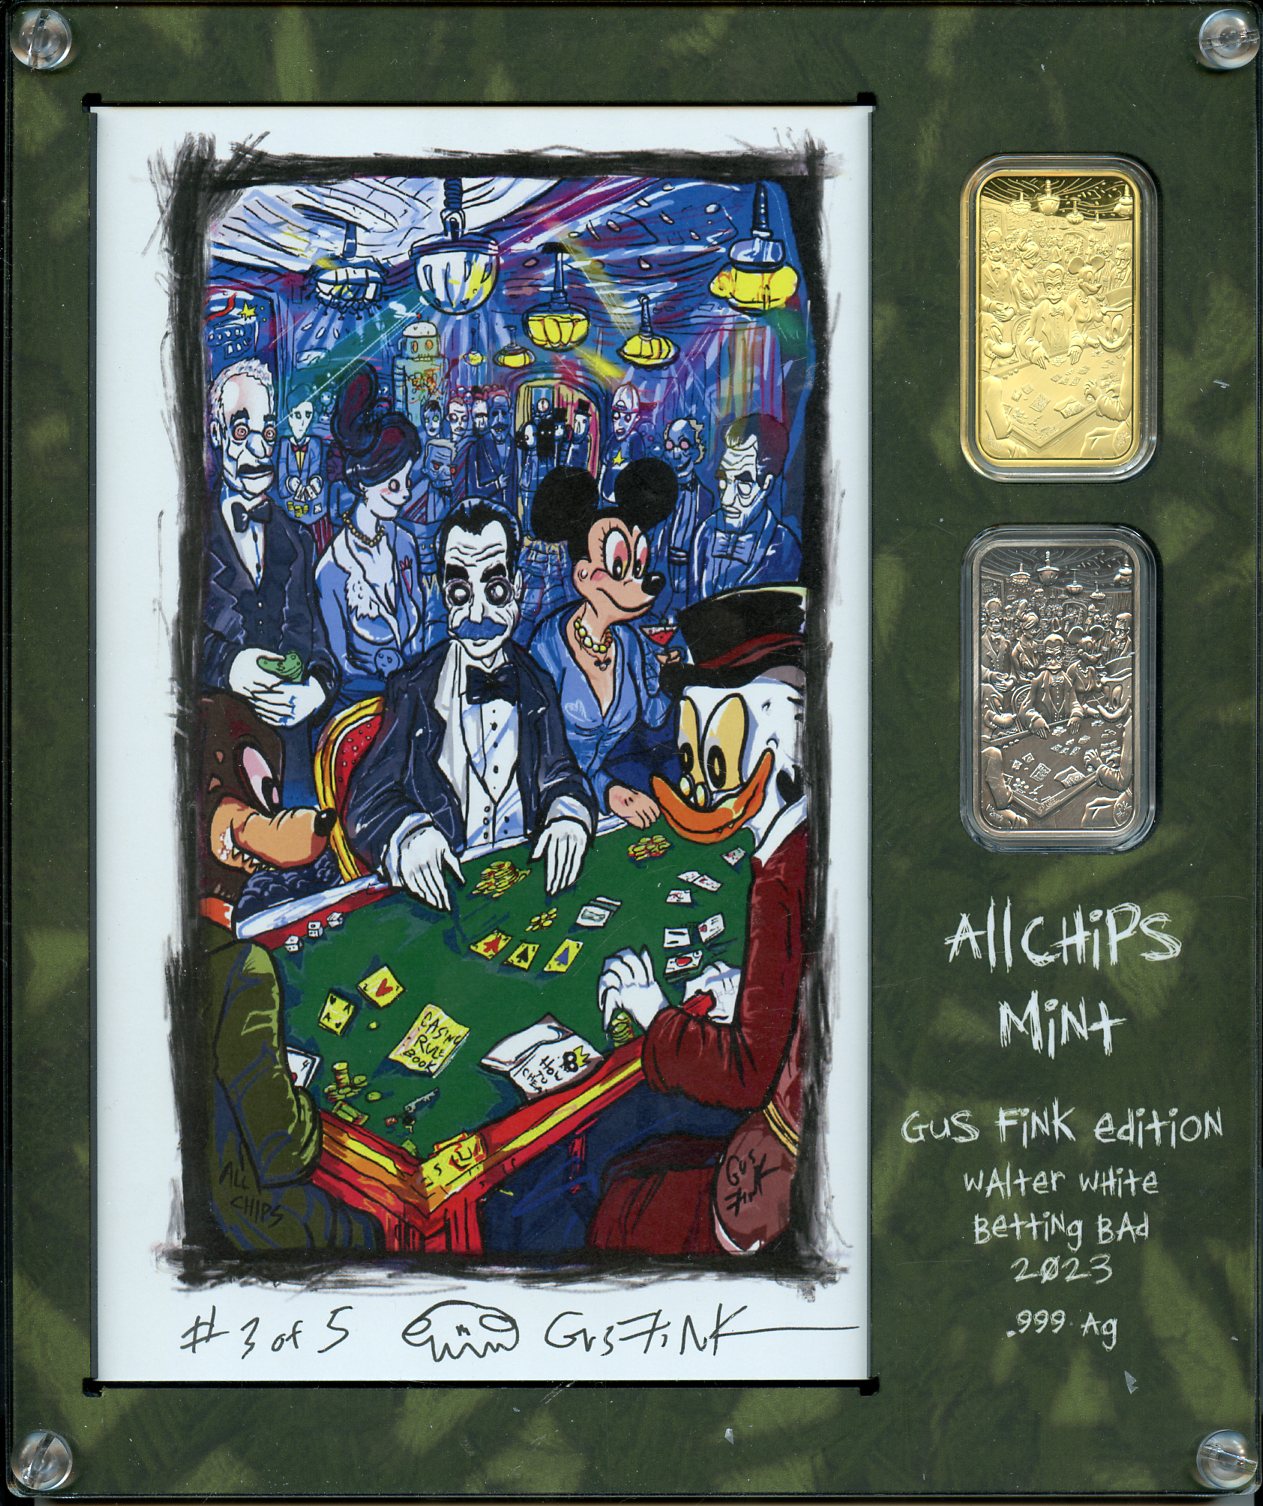 Walter White Betting Bad This is a Rare Limited to only 5 SPECIAL SETs Gus Fink Drawing and Both Bar